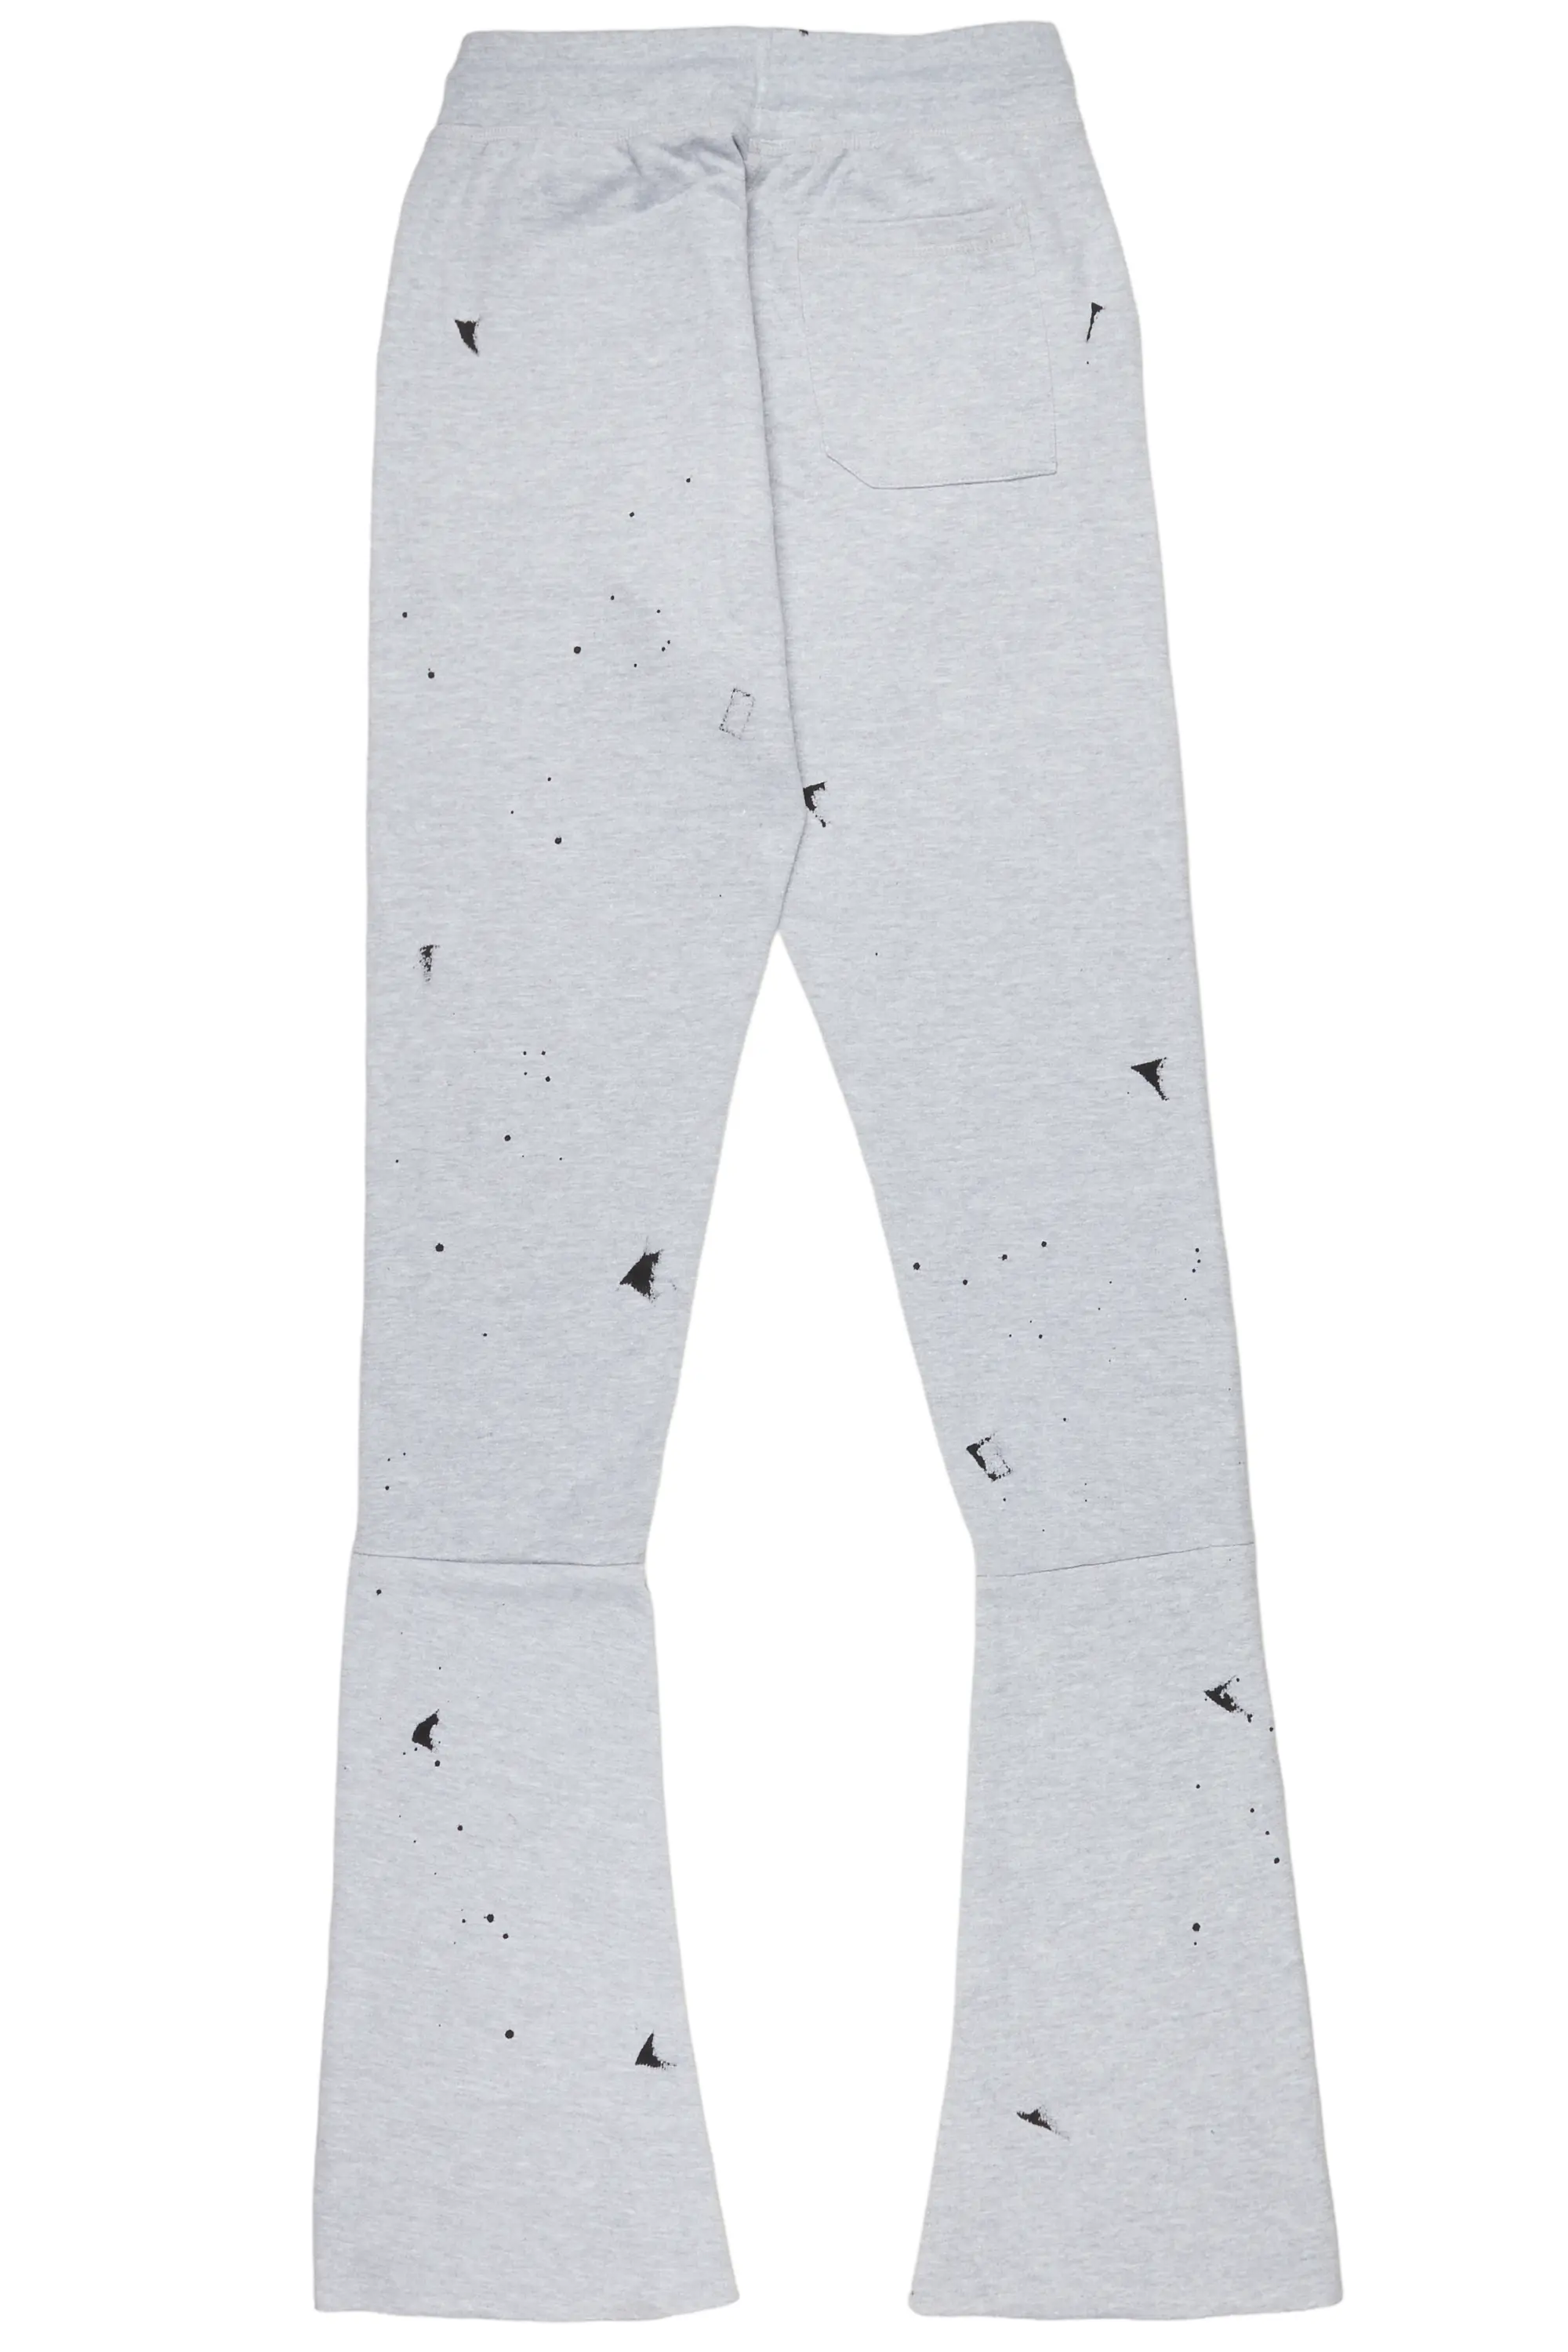 Farlee Heather Grey Super Stacked Flare Pants